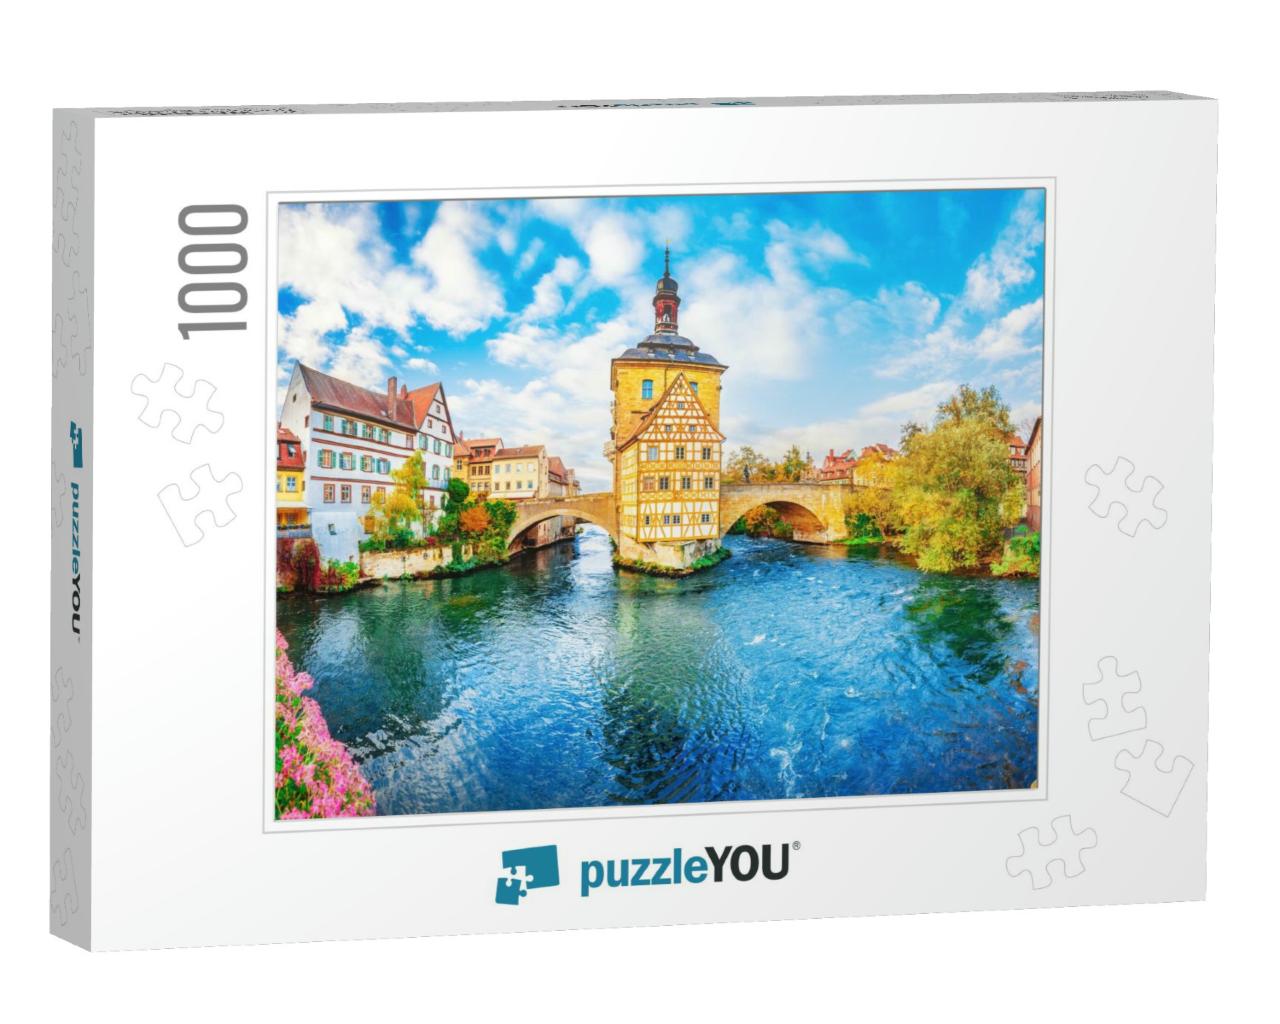 Old Town Bamberg in Bavaria, Germany. Romantic Historical... Jigsaw Puzzle with 1000 pieces